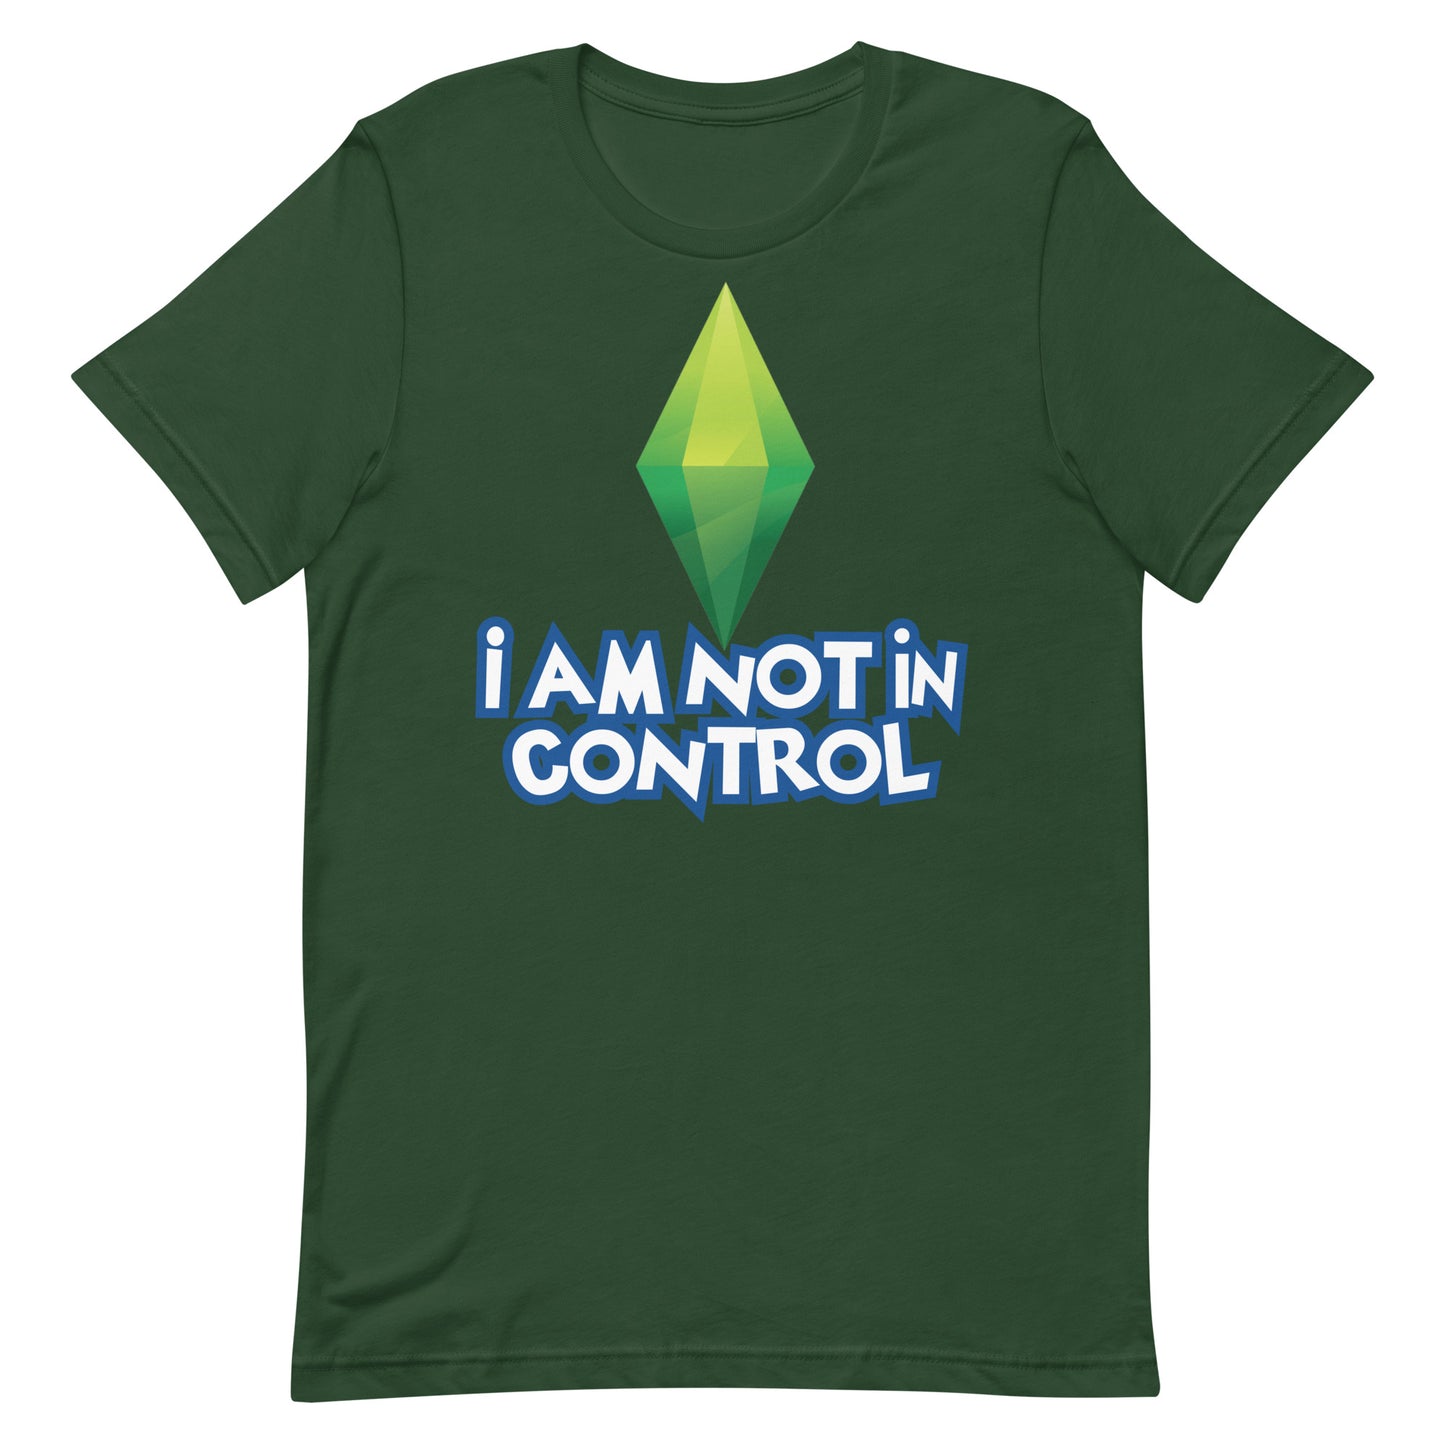 I Am Not in Control Unisex t-shirt